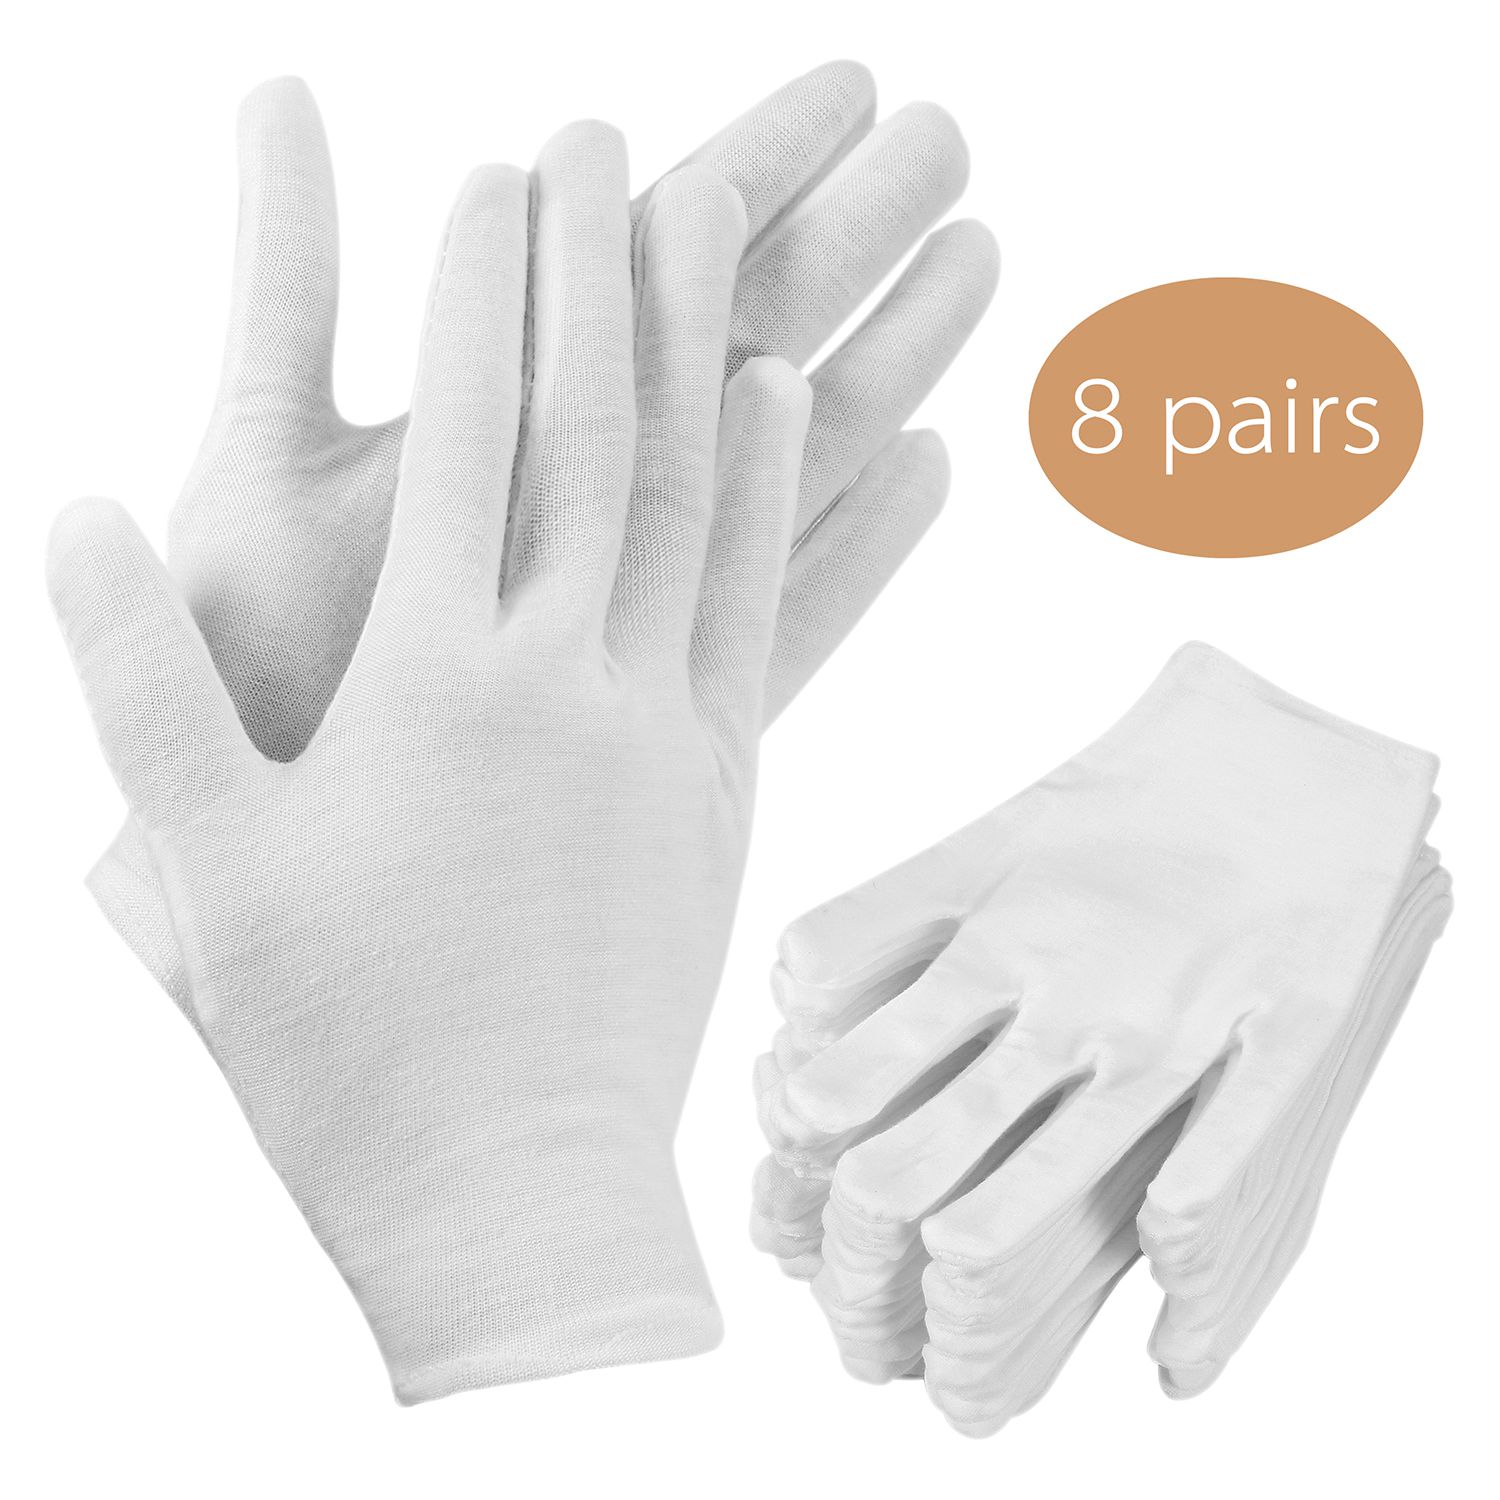 48 Pairs White Cotton Gloves Soft Archival Gloves Cleaning Serving Gloves for Dry Hand Moisturizing Jewelry Silver Inspection Coin Collection 